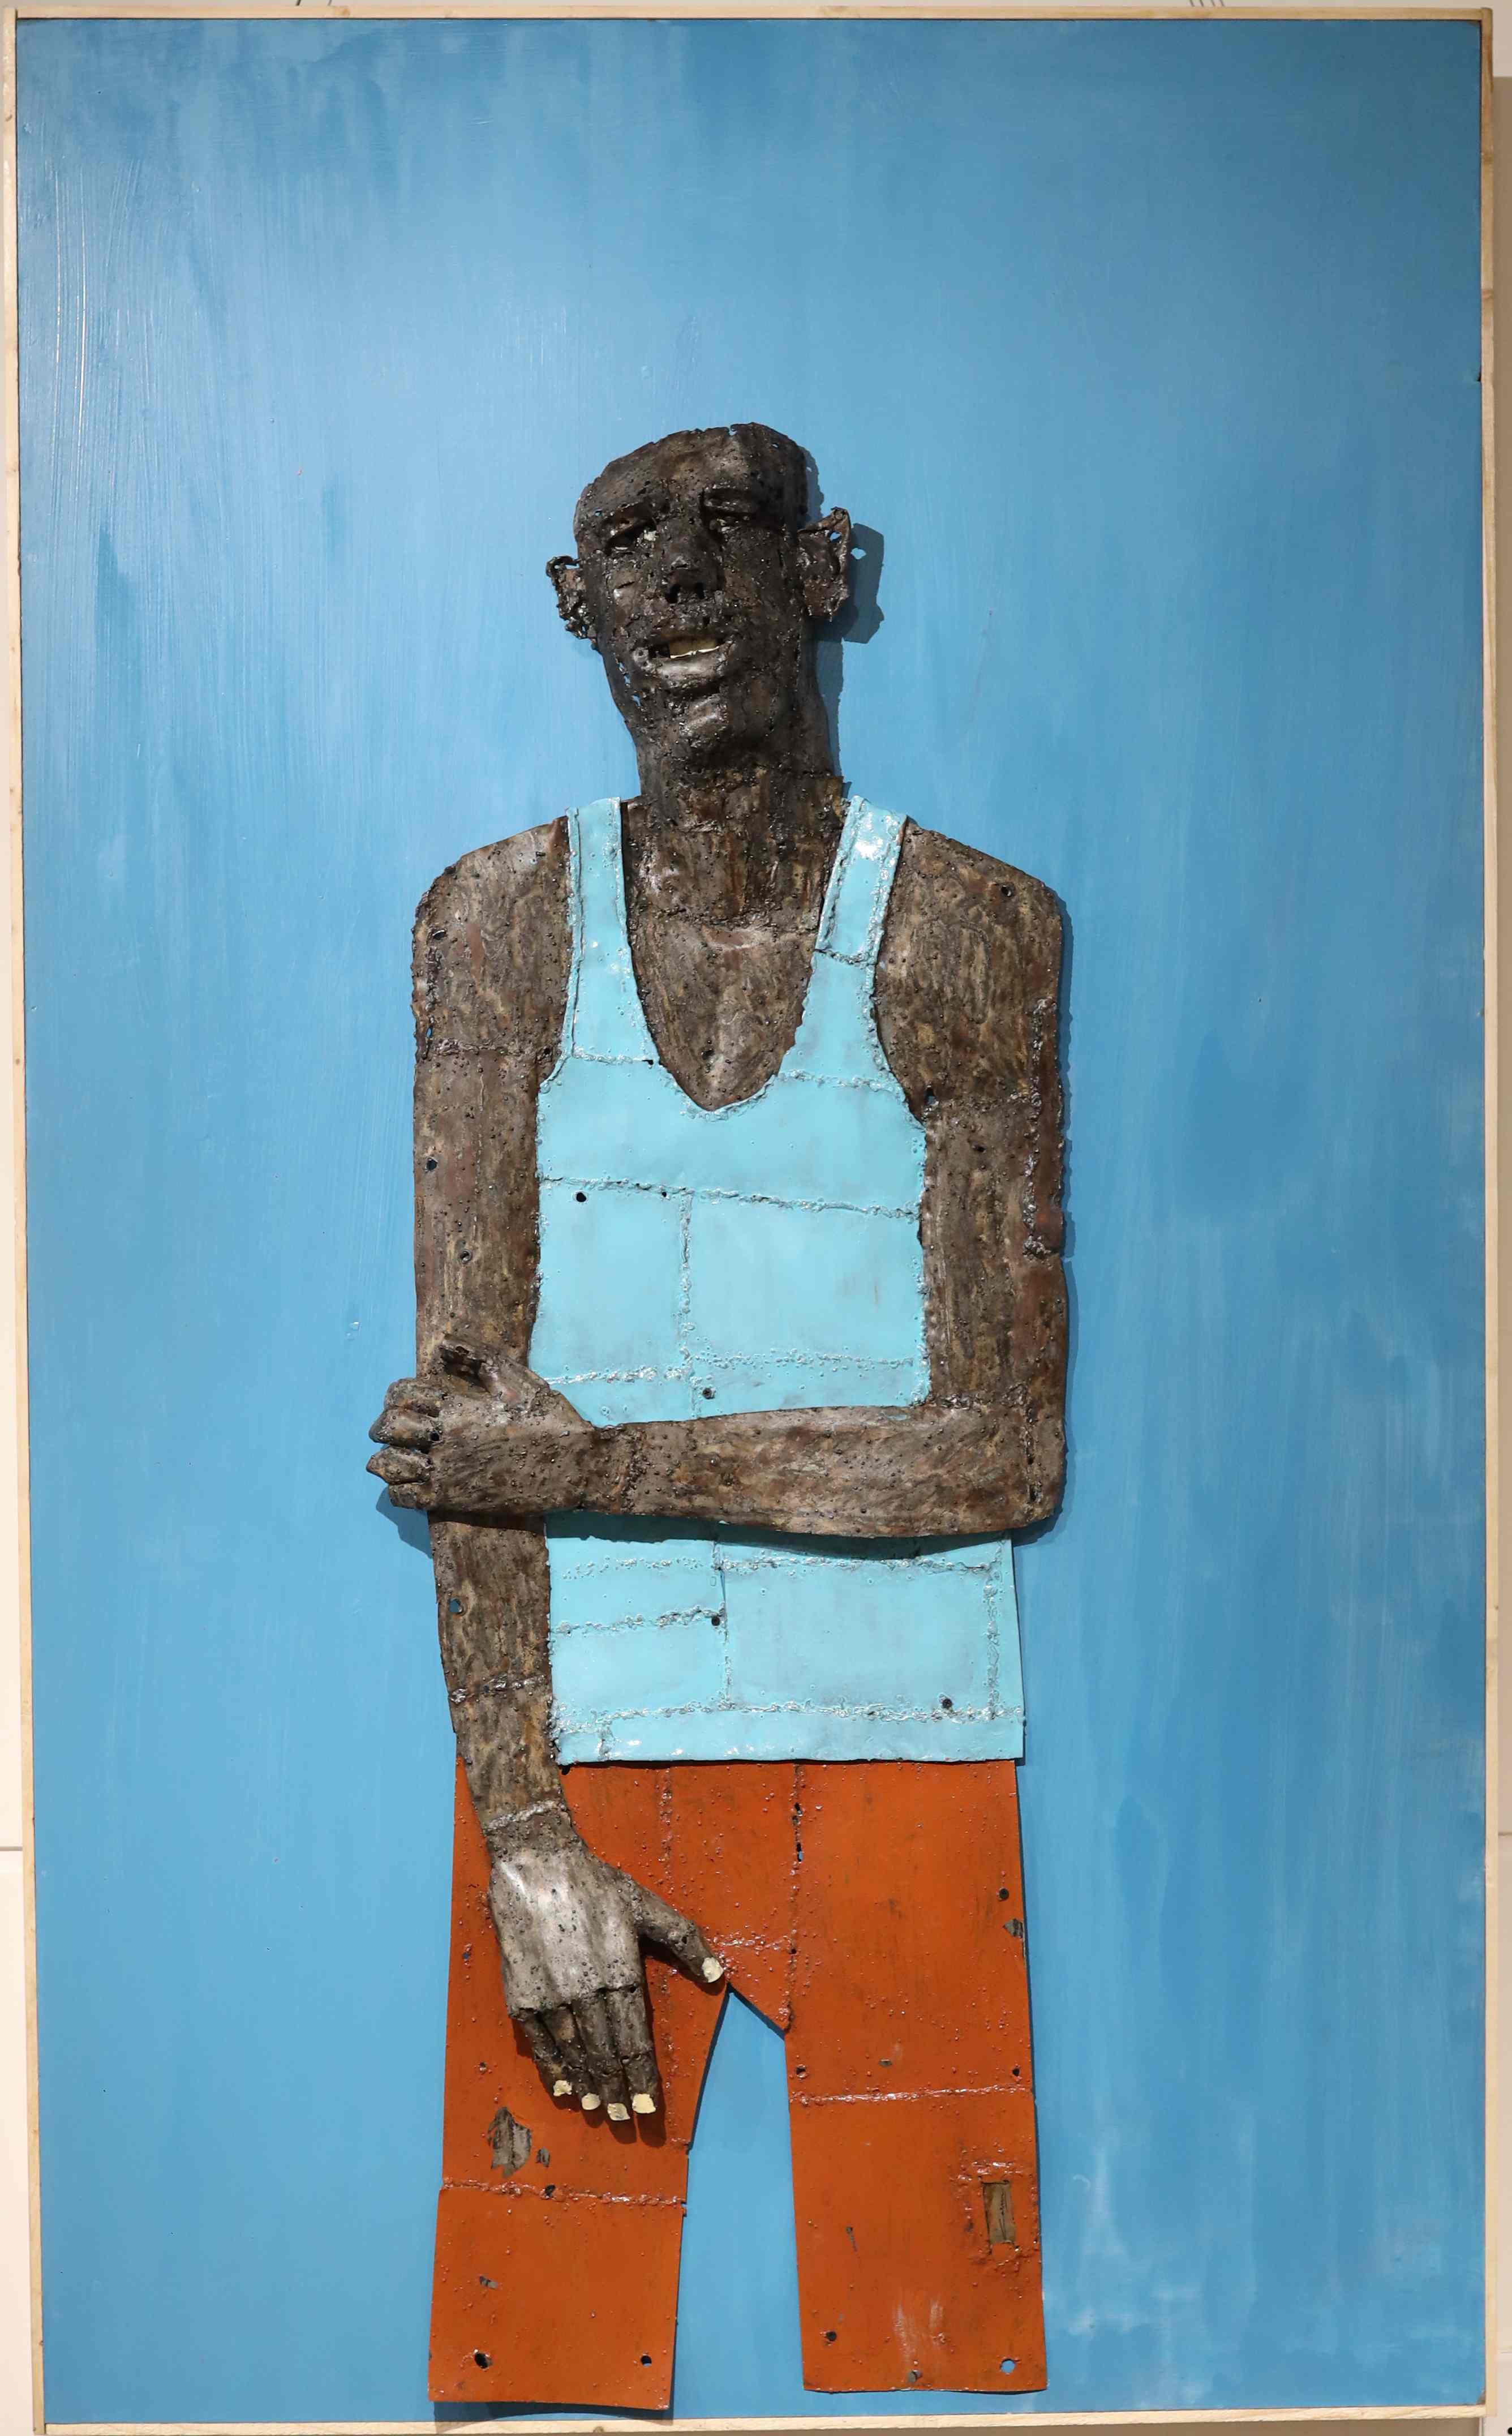 Artist: Casim Mahmood<br>Title: Man in the Blue Vest<br>Medium: Metal on Board<br>Size in inches: 72x48